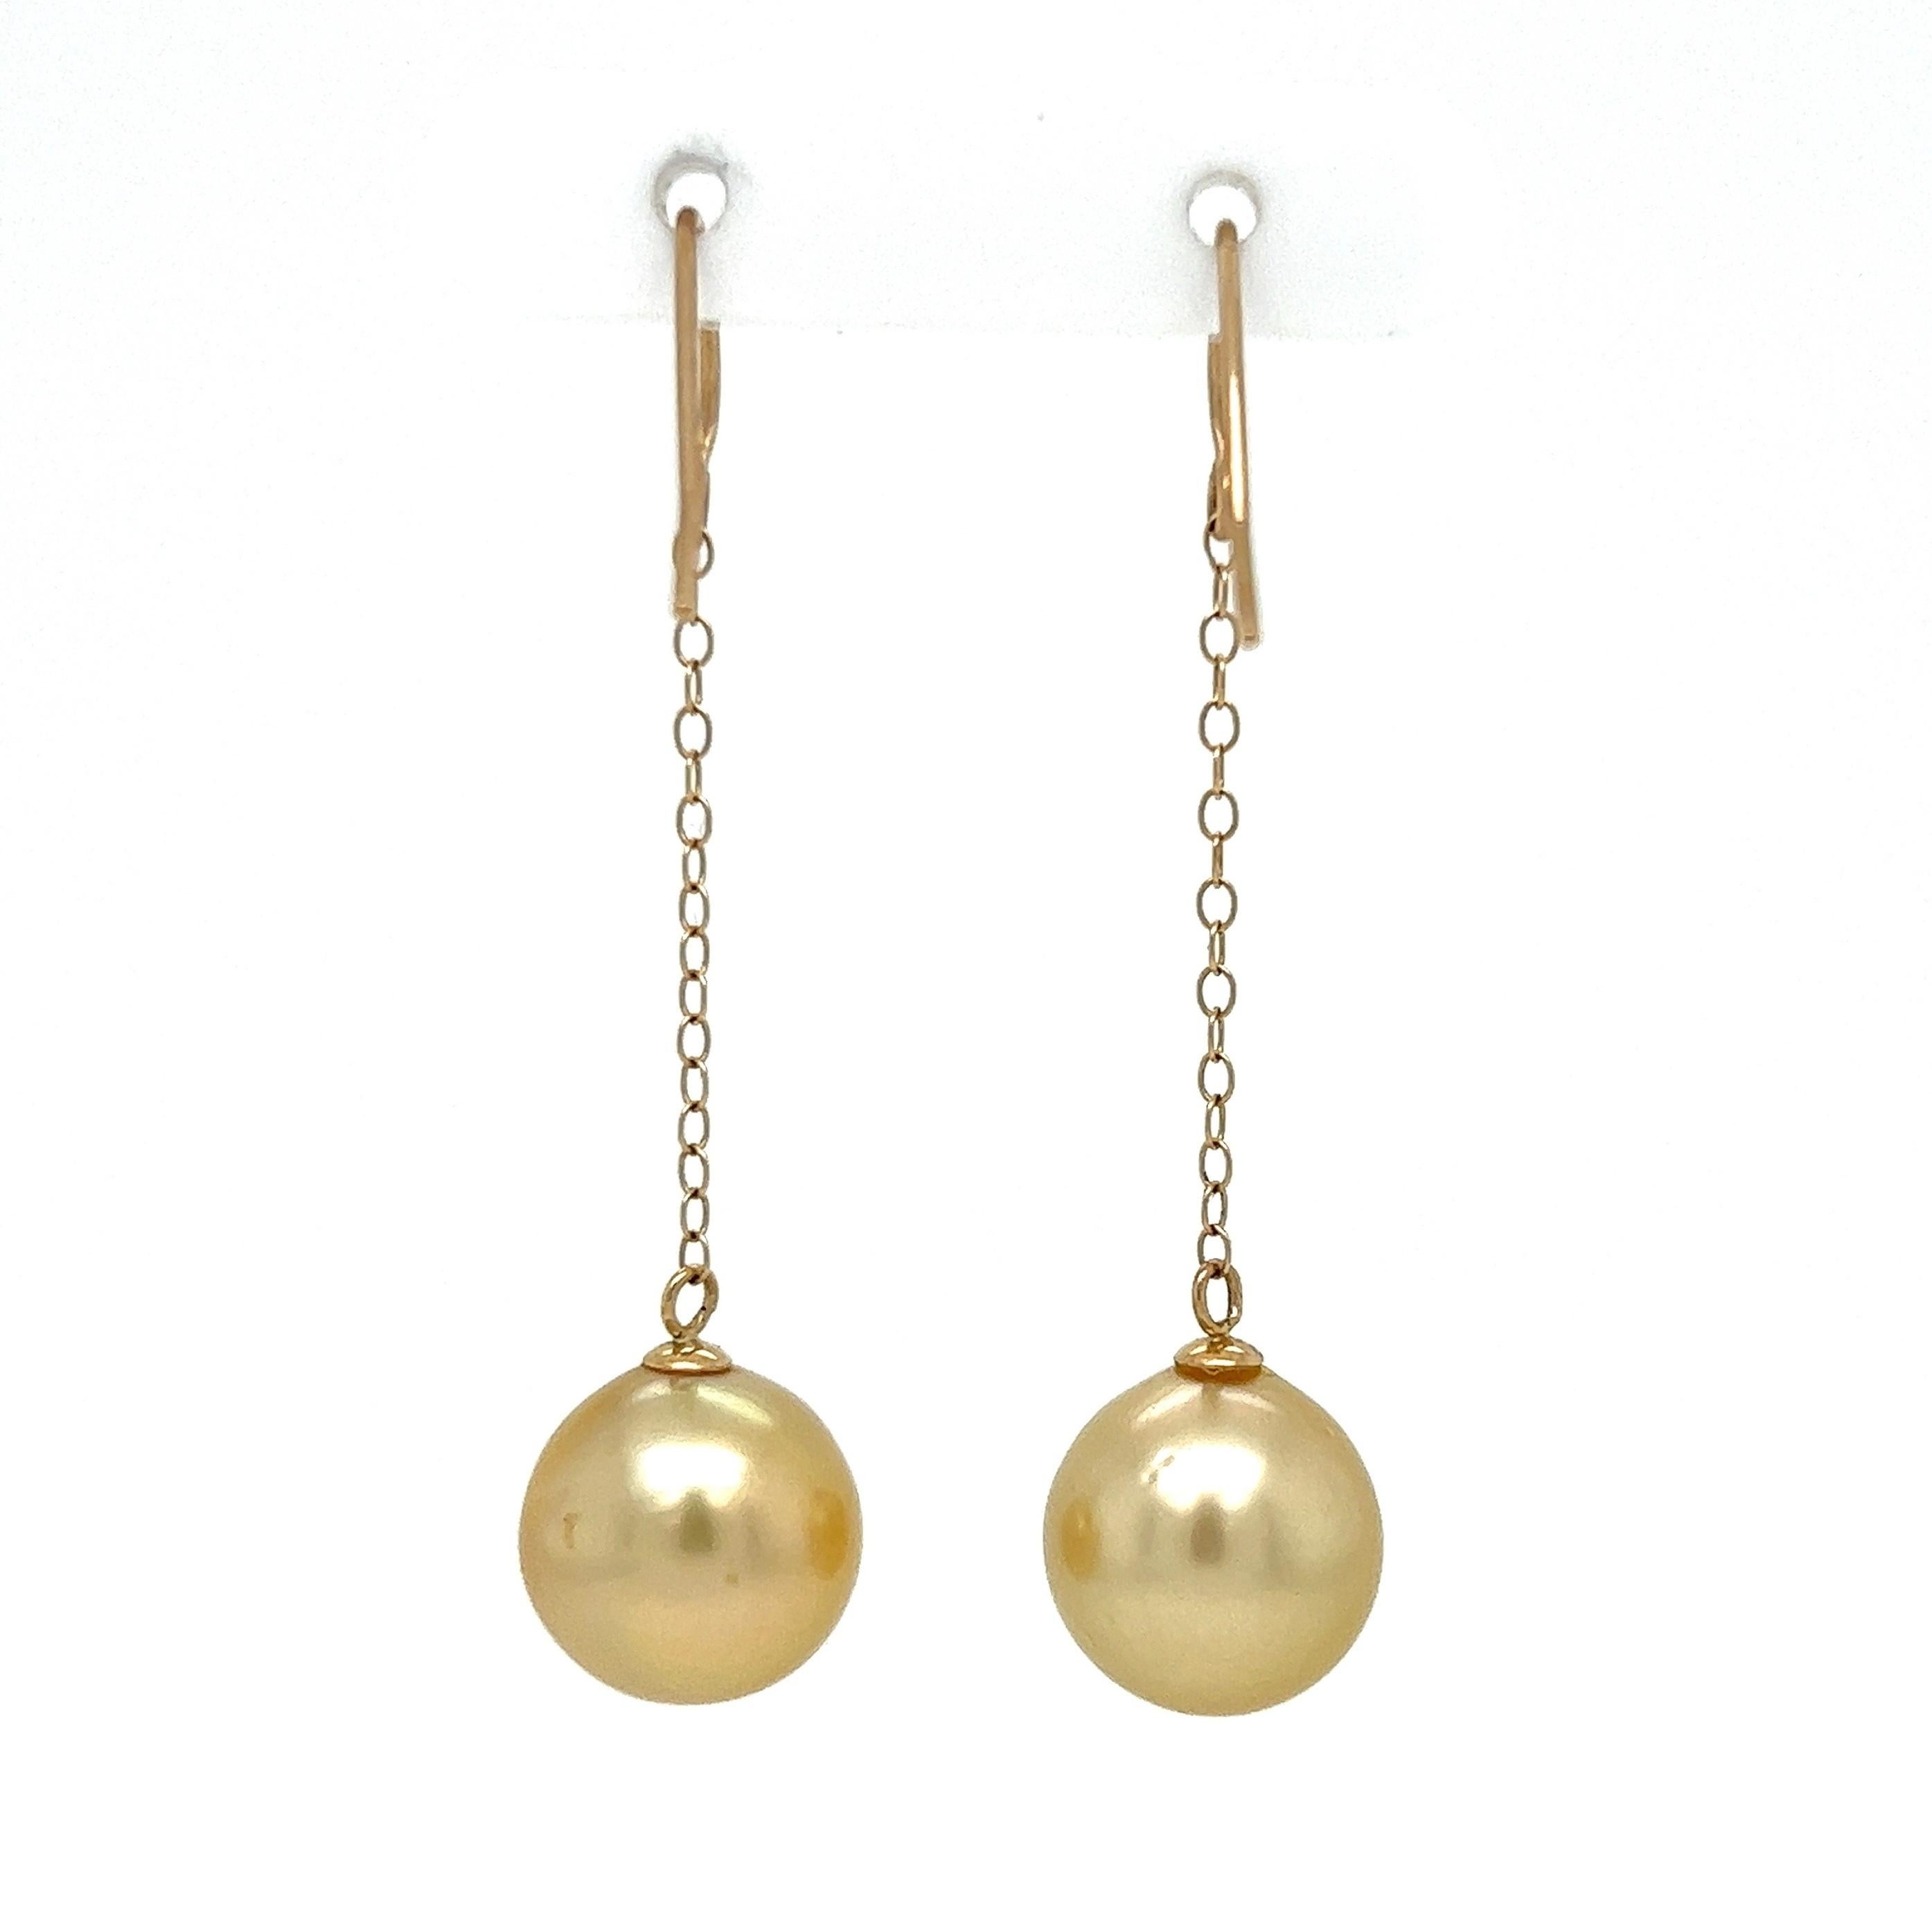 Vintage 11.5mm Golden South Sea Pearl Gold Drop Earrings In Excellent Condition For Sale In Montreal, QC